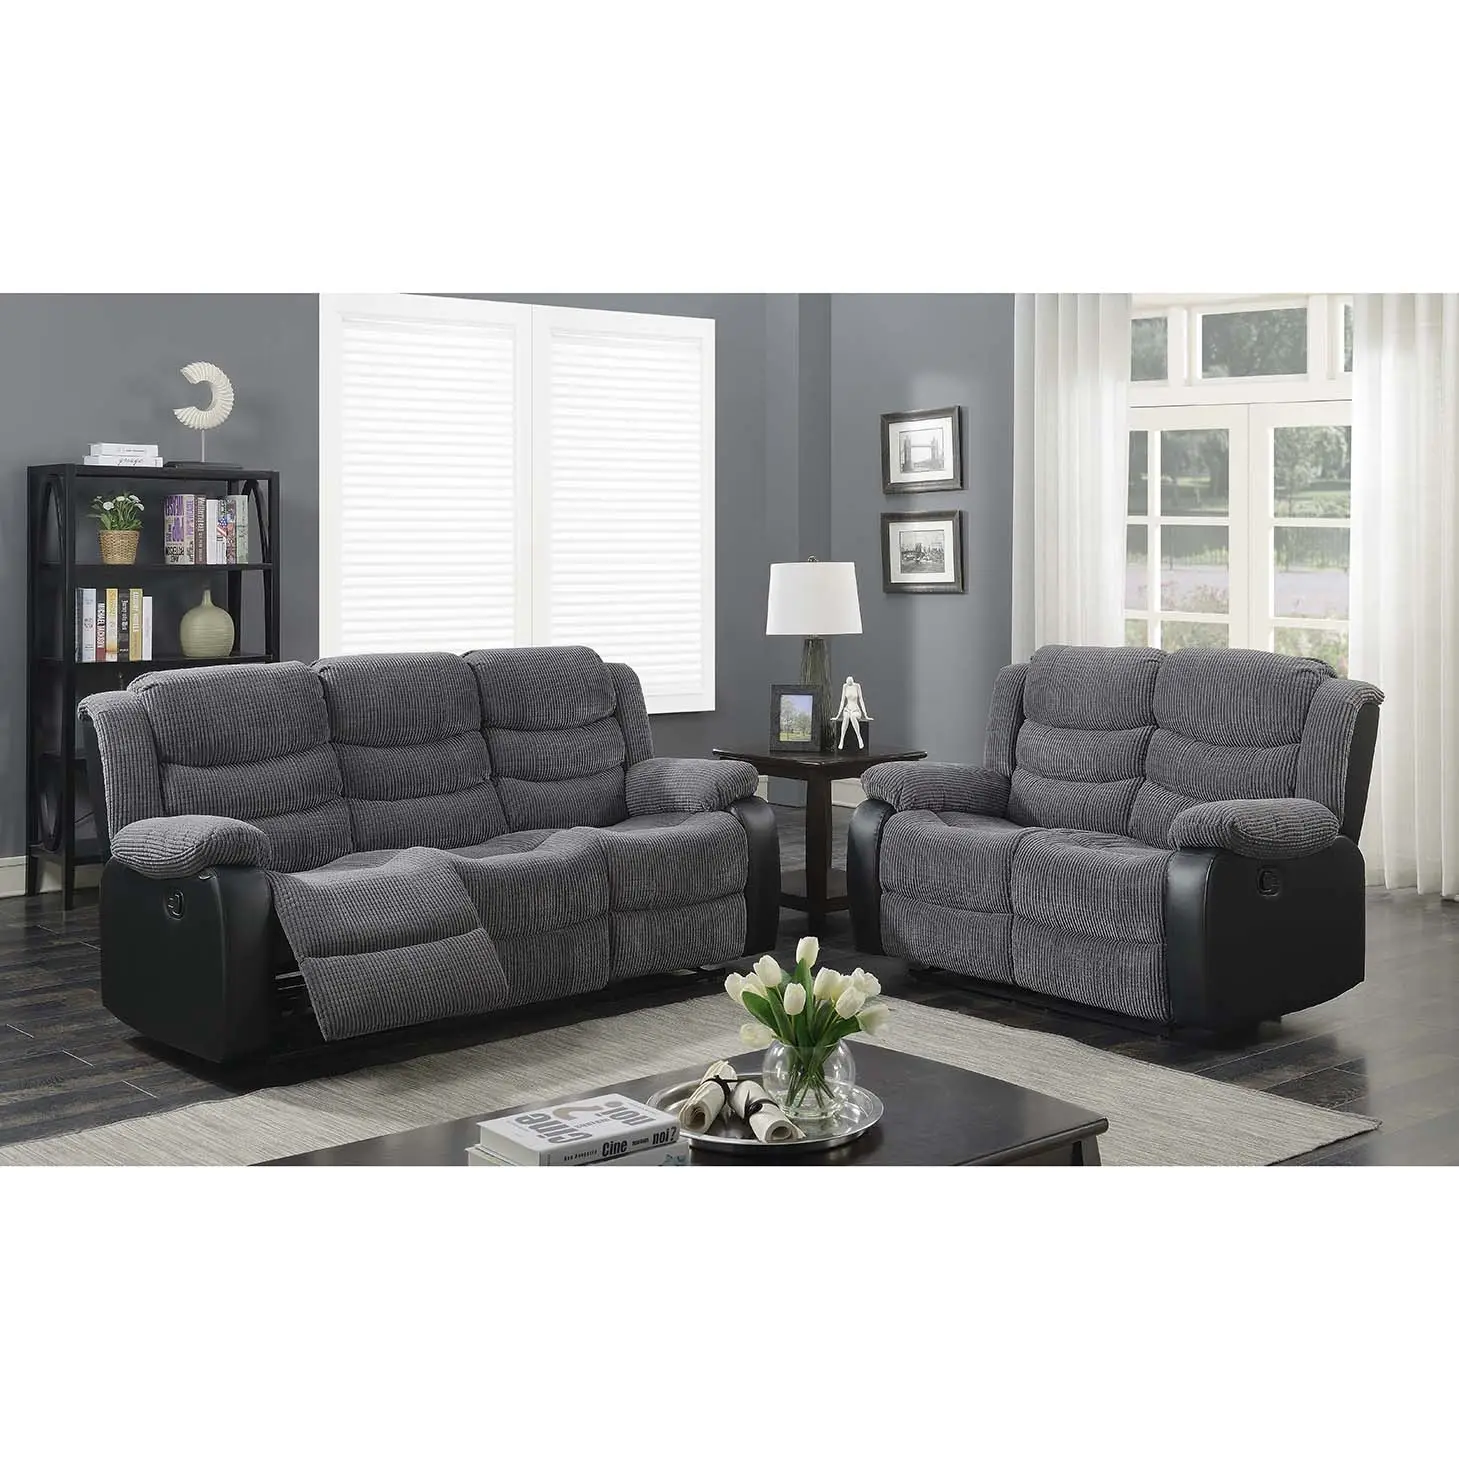 Hot Sell Sectionals Reclining Sofa Comfortable Leather Recliner Sofa Set Living Room Furniture Sets Couch Living Room Sofas